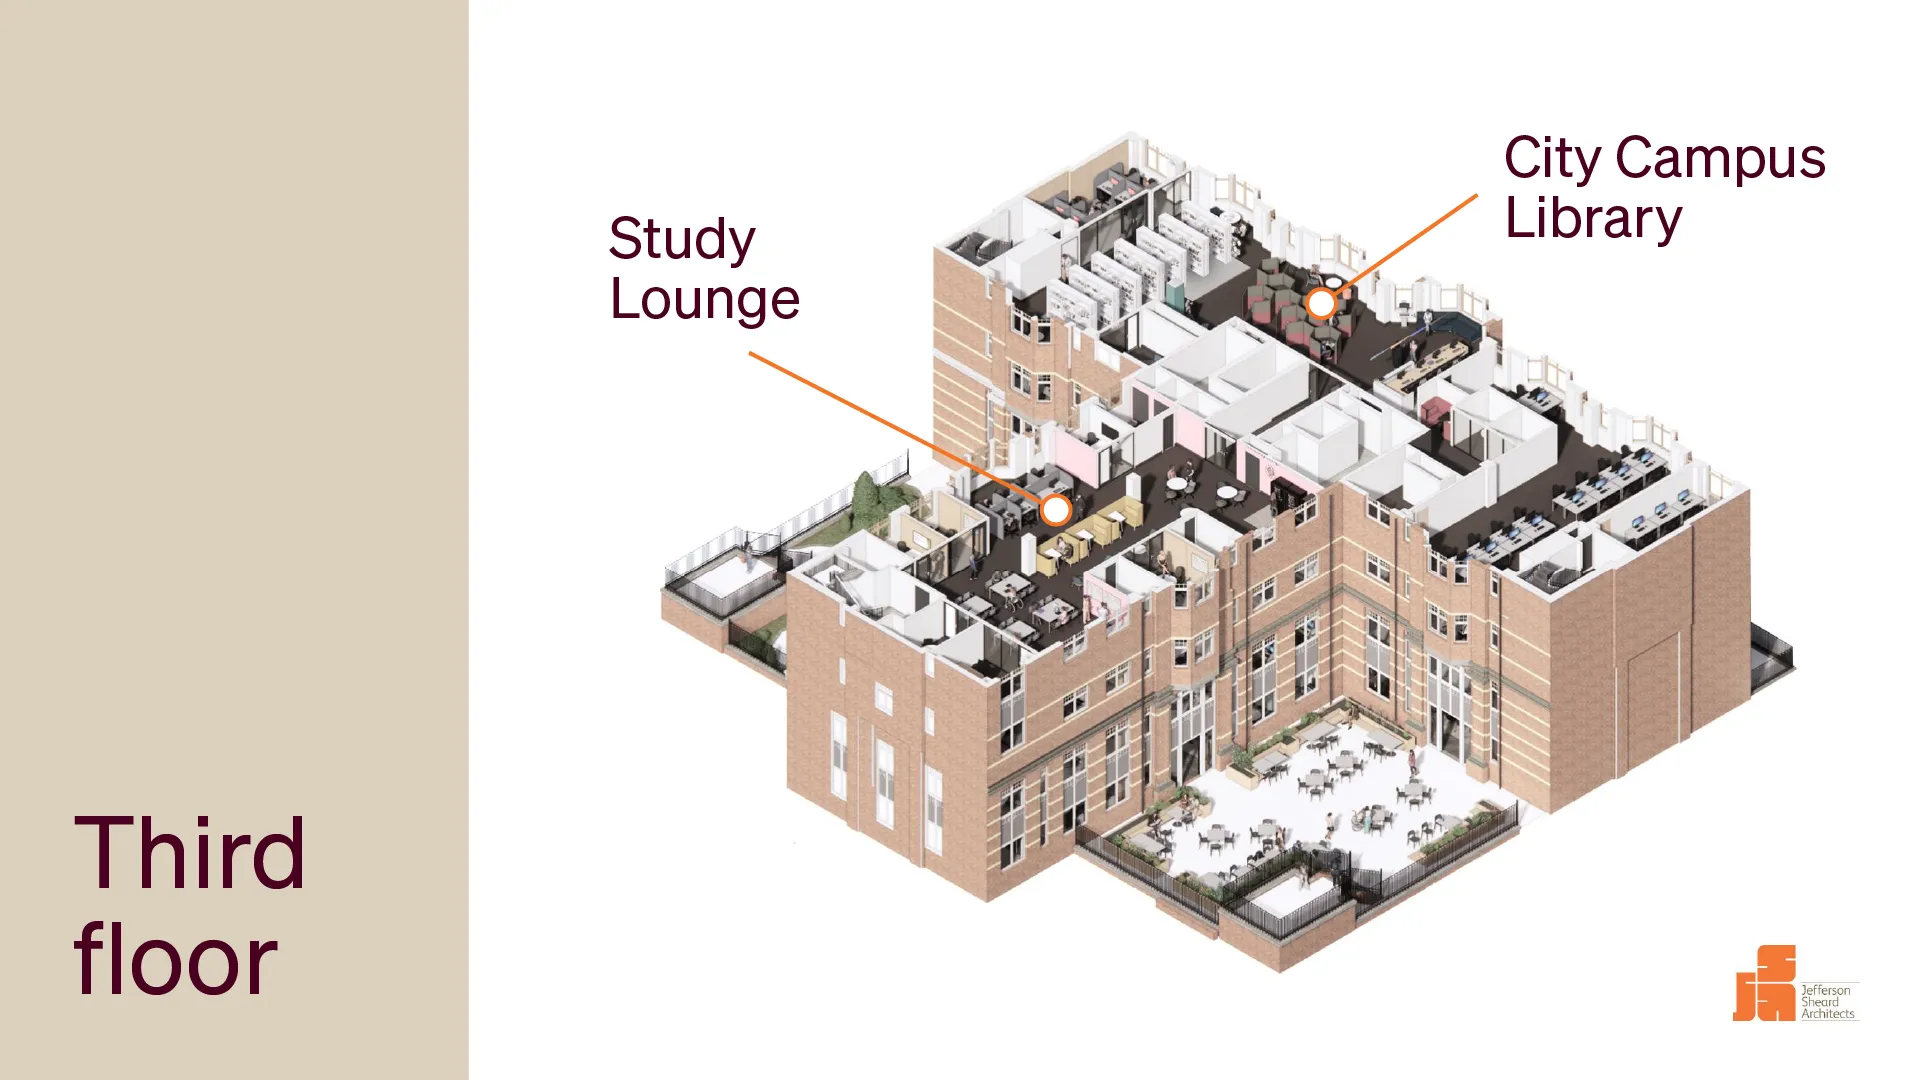 Digital mock up of the third-floor layout of the Leeds City Campus with labels showcasing the study zone on the left and the City Campus Library on the right.